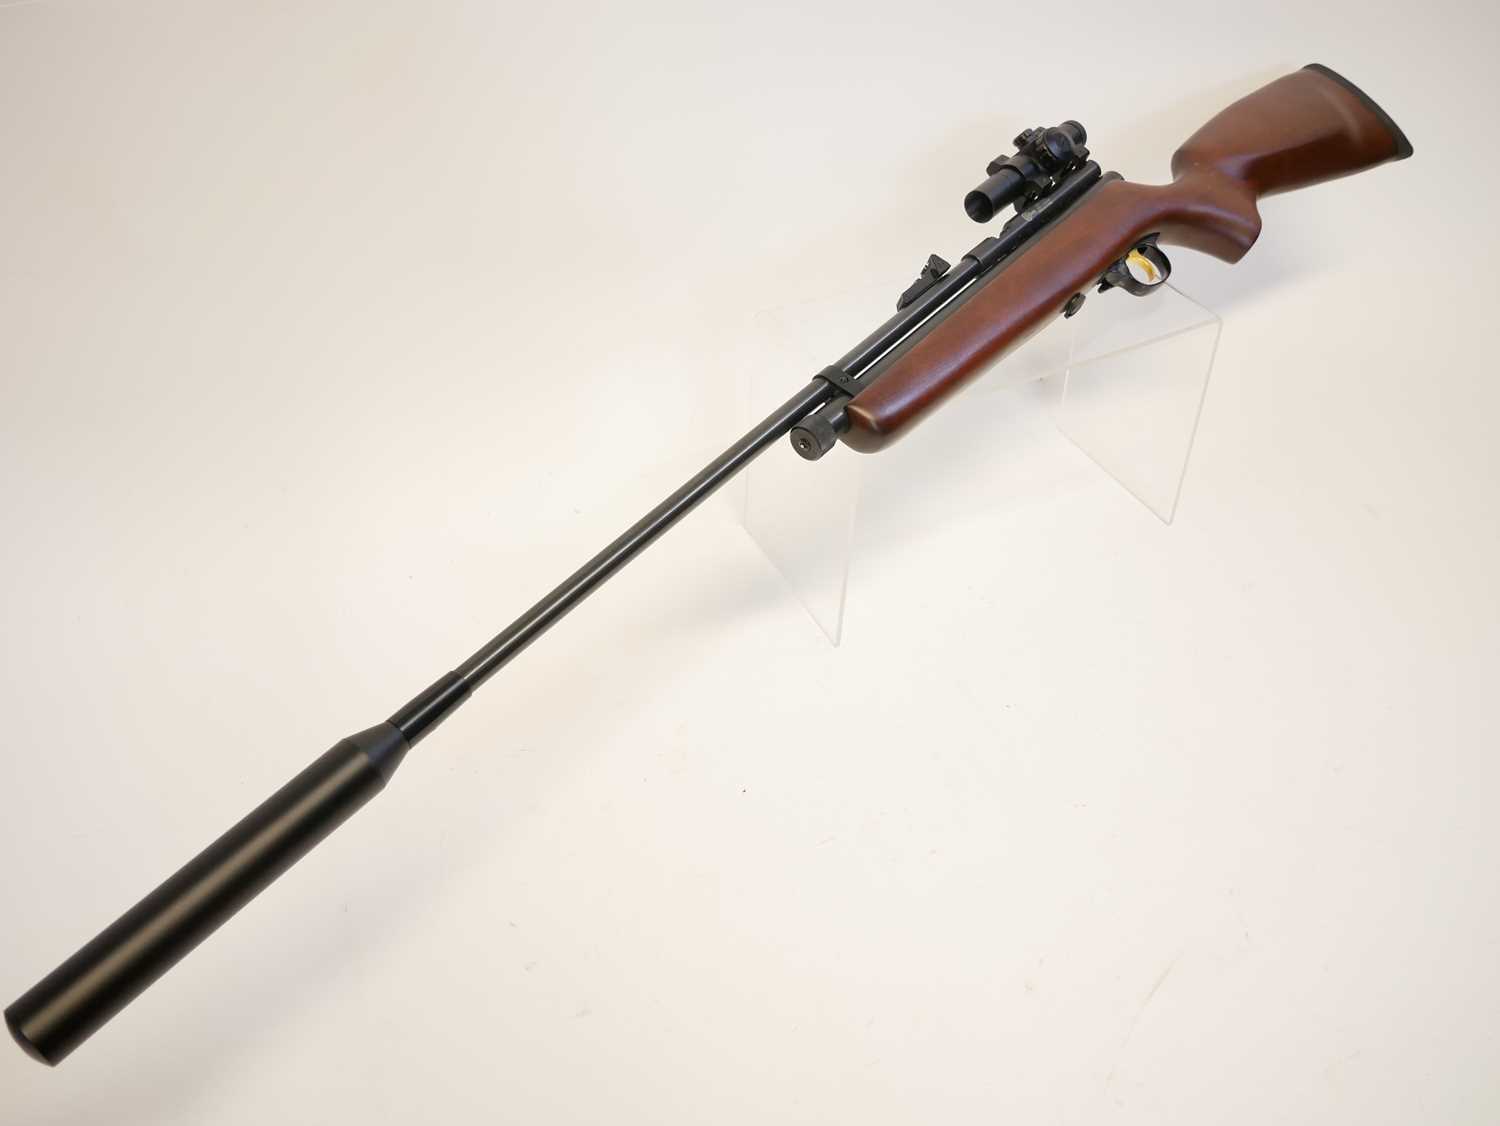 SMK QB78DL .22 CO2 air rifle, 29inch barrel including the fitted moderator, fitted with Hawke scope, - Image 11 of 12